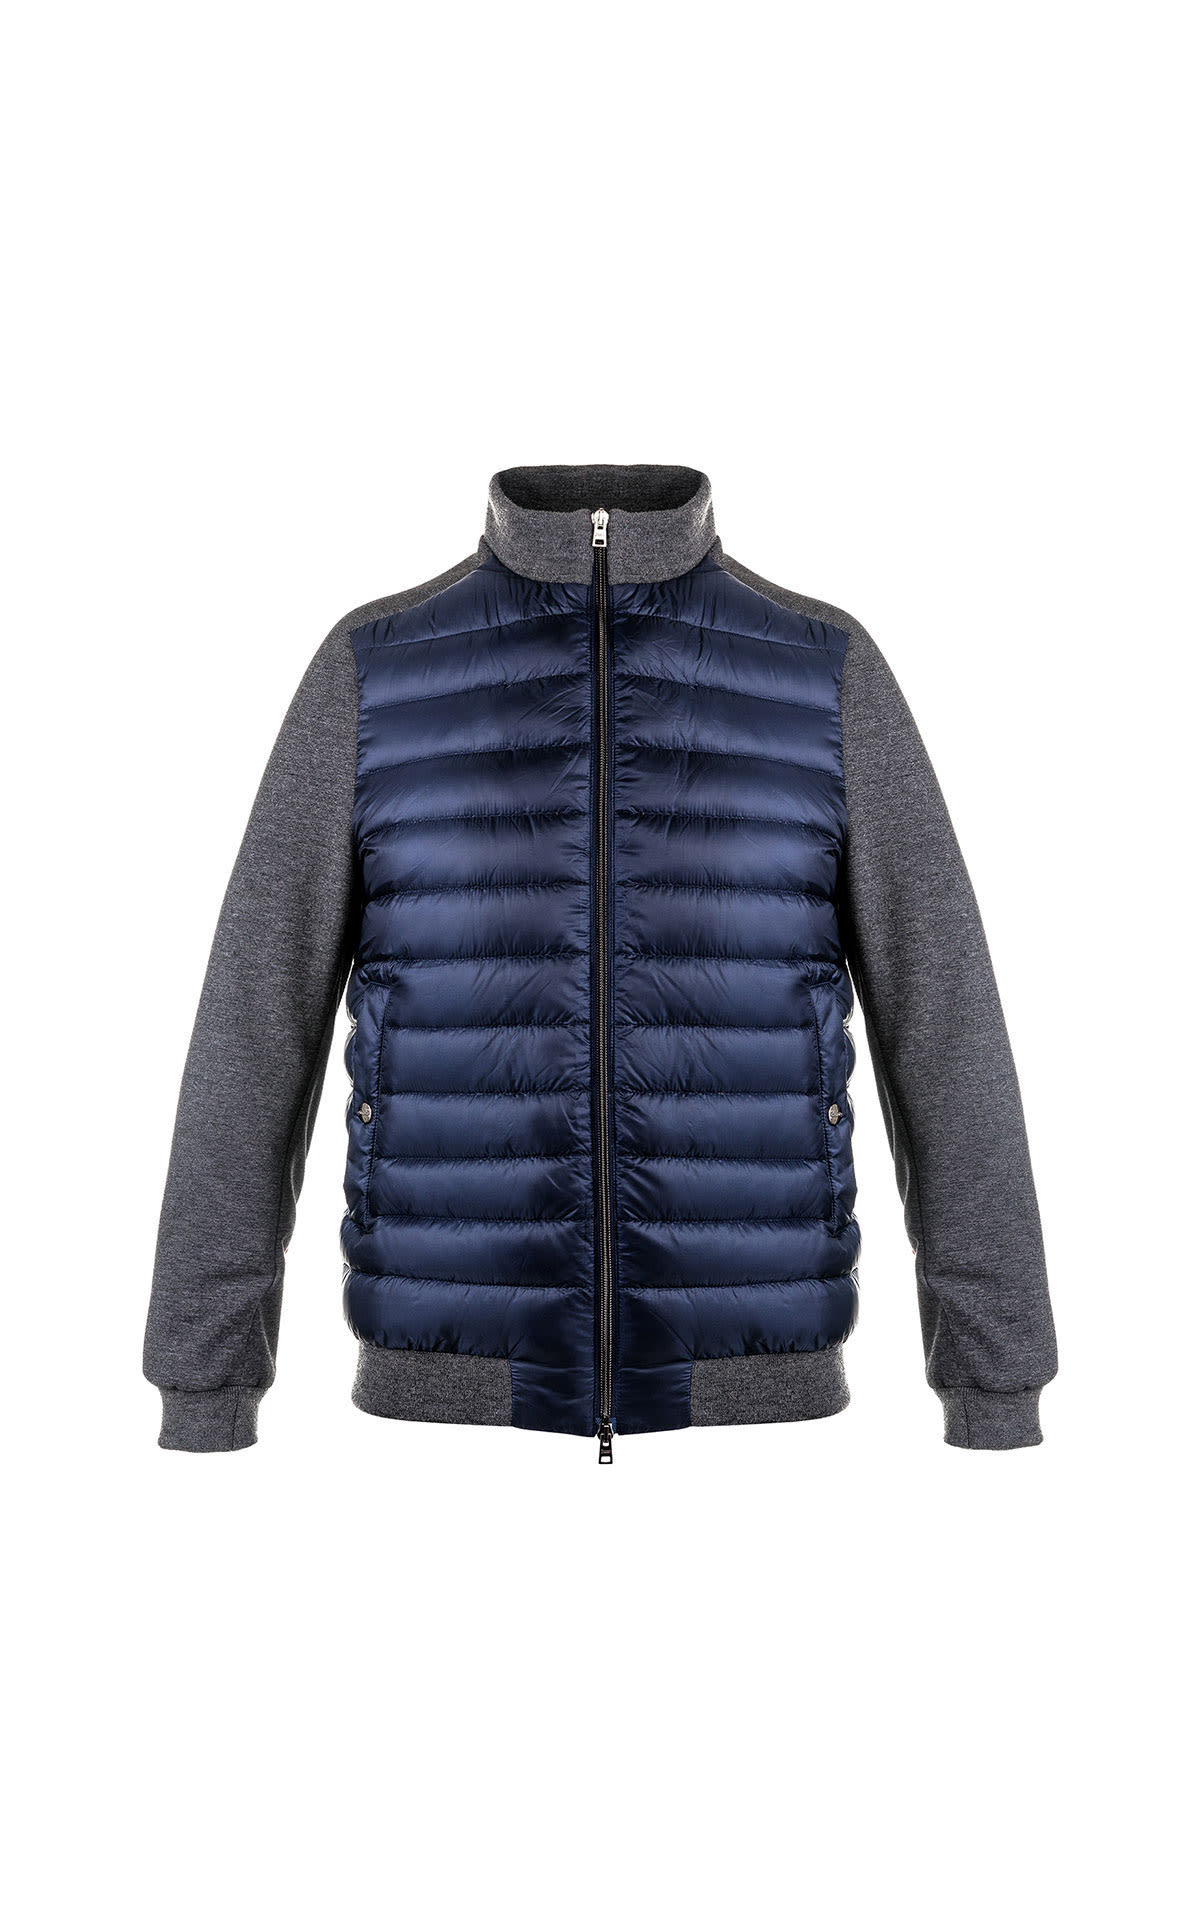 Herno gray and blue vest sweater